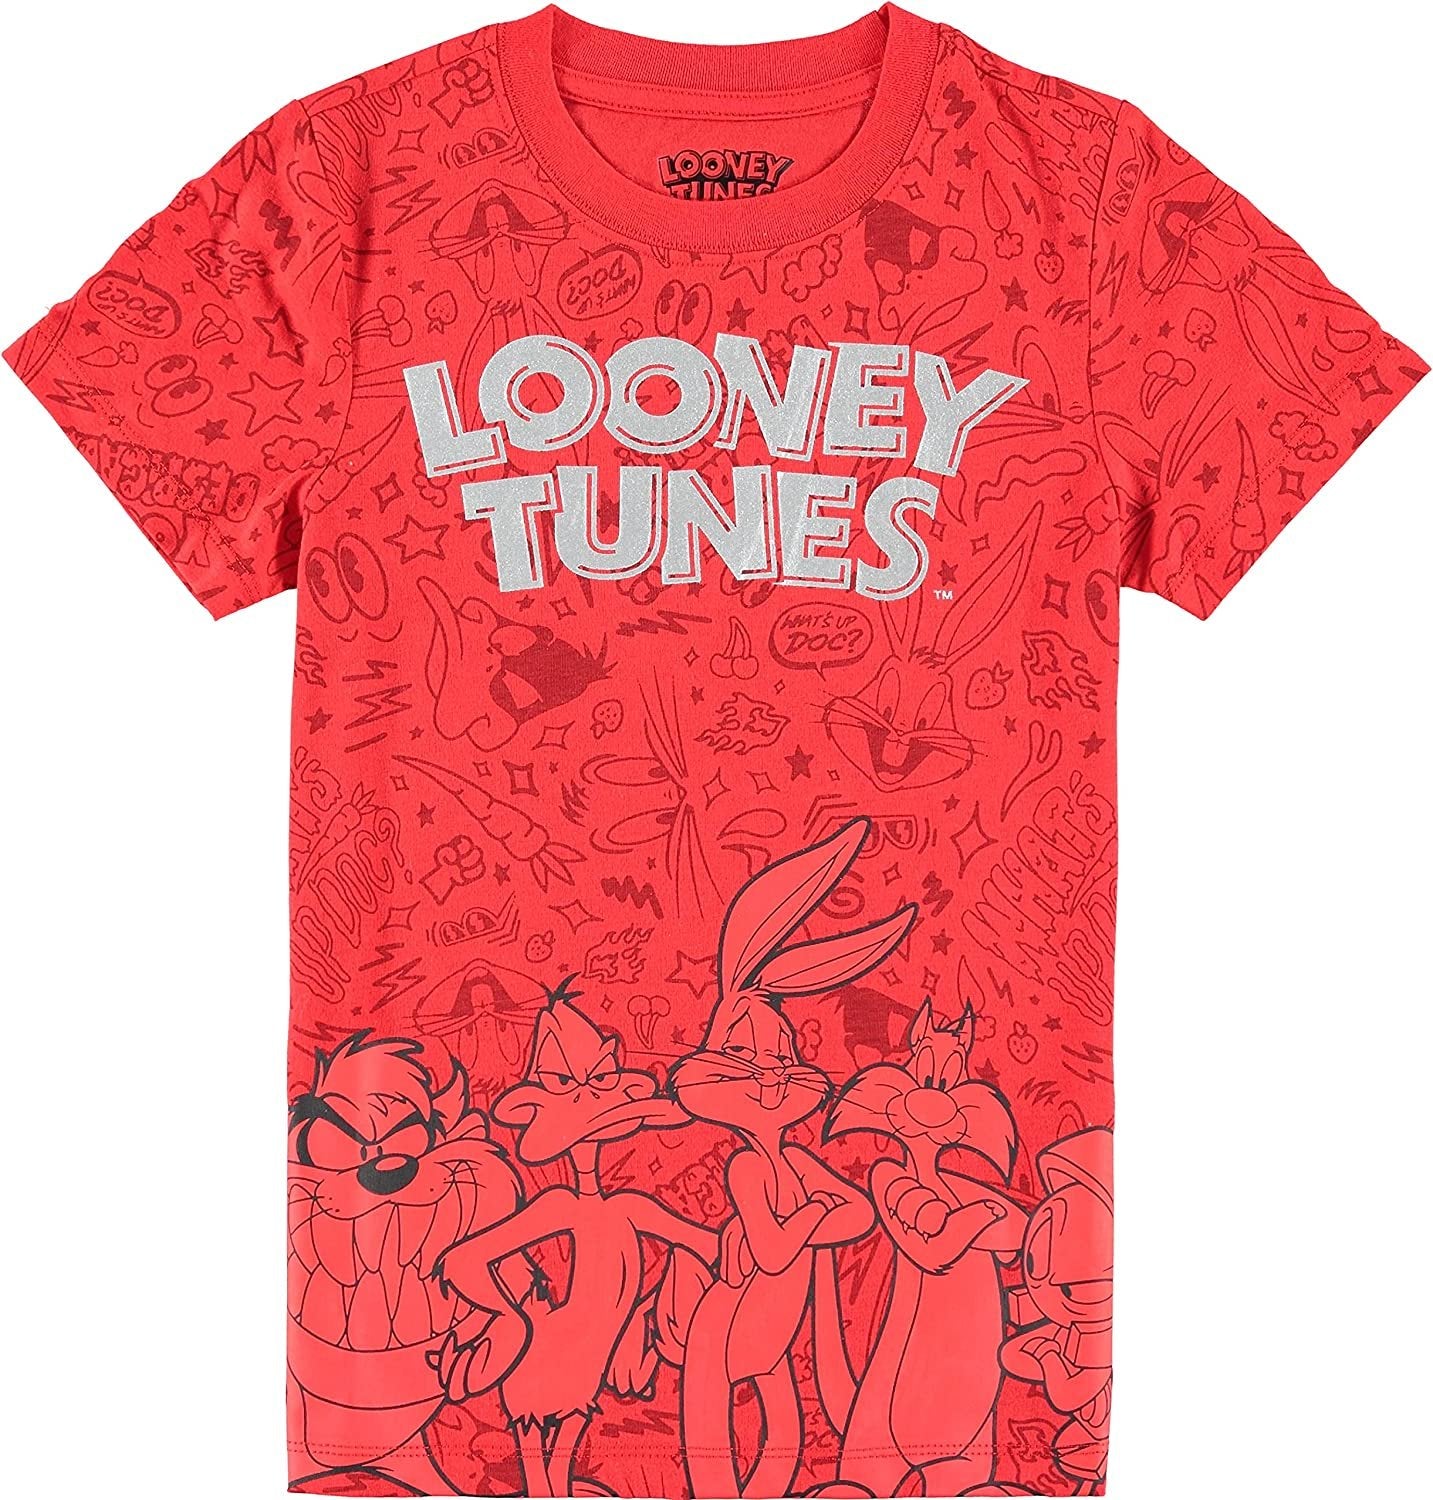 Looney Tunes Boys Short Sleeve T-Shirt - All Over Print T-Shirt Bugs Bunny, Taz, Daffy Duck and Friends